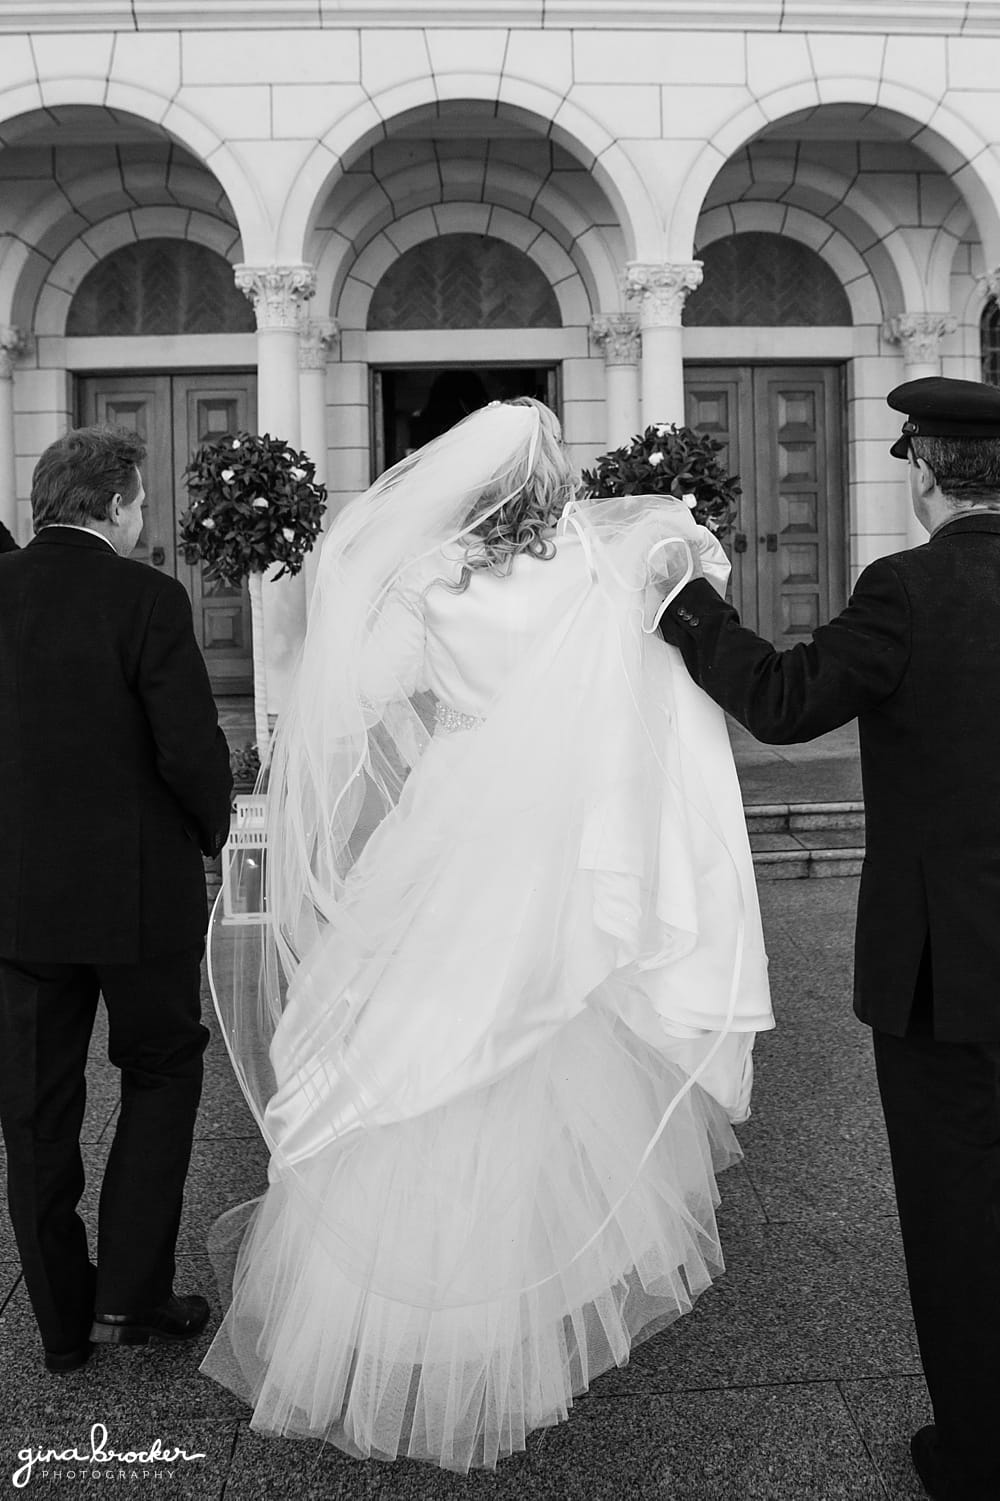 Bride walks into church with her father